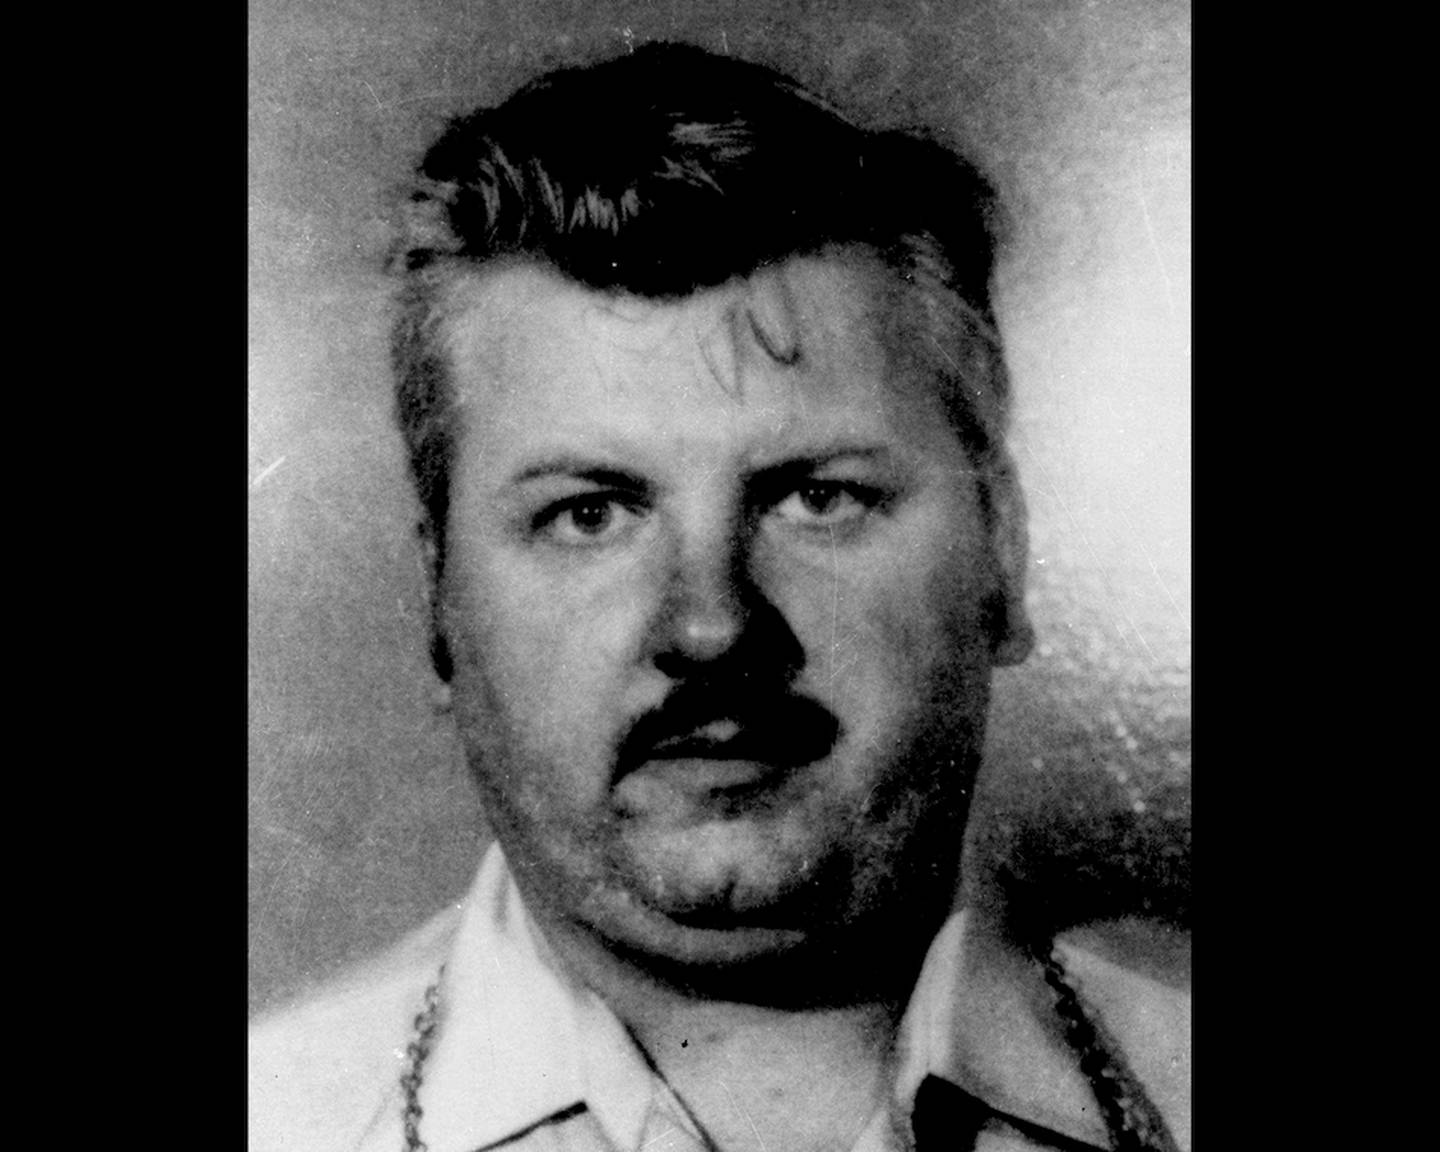 FILE - This 1978 file photo shows serial killer John Wayne Gacy. The case of John Wayne Gacy has helped authorities solve another slaying, one that he didnít commit. The Cook County Sheriffís Office is scheduled to announce Wednesday, April 23, 2014, they have identified the remains found in a forest preserve in 2008 as those of 22-year-old Edward Beaudion of Chicago. Beaudion was identified after his relatives came forward to submit DNA samples as part of the effort to identify several of Gacyís 1970s victims. Authorities believe Missouri resident Jerry Jackson killed Beaudion in 1978. But without a body at the time, they never charged him. Jackson died last year at age 62.